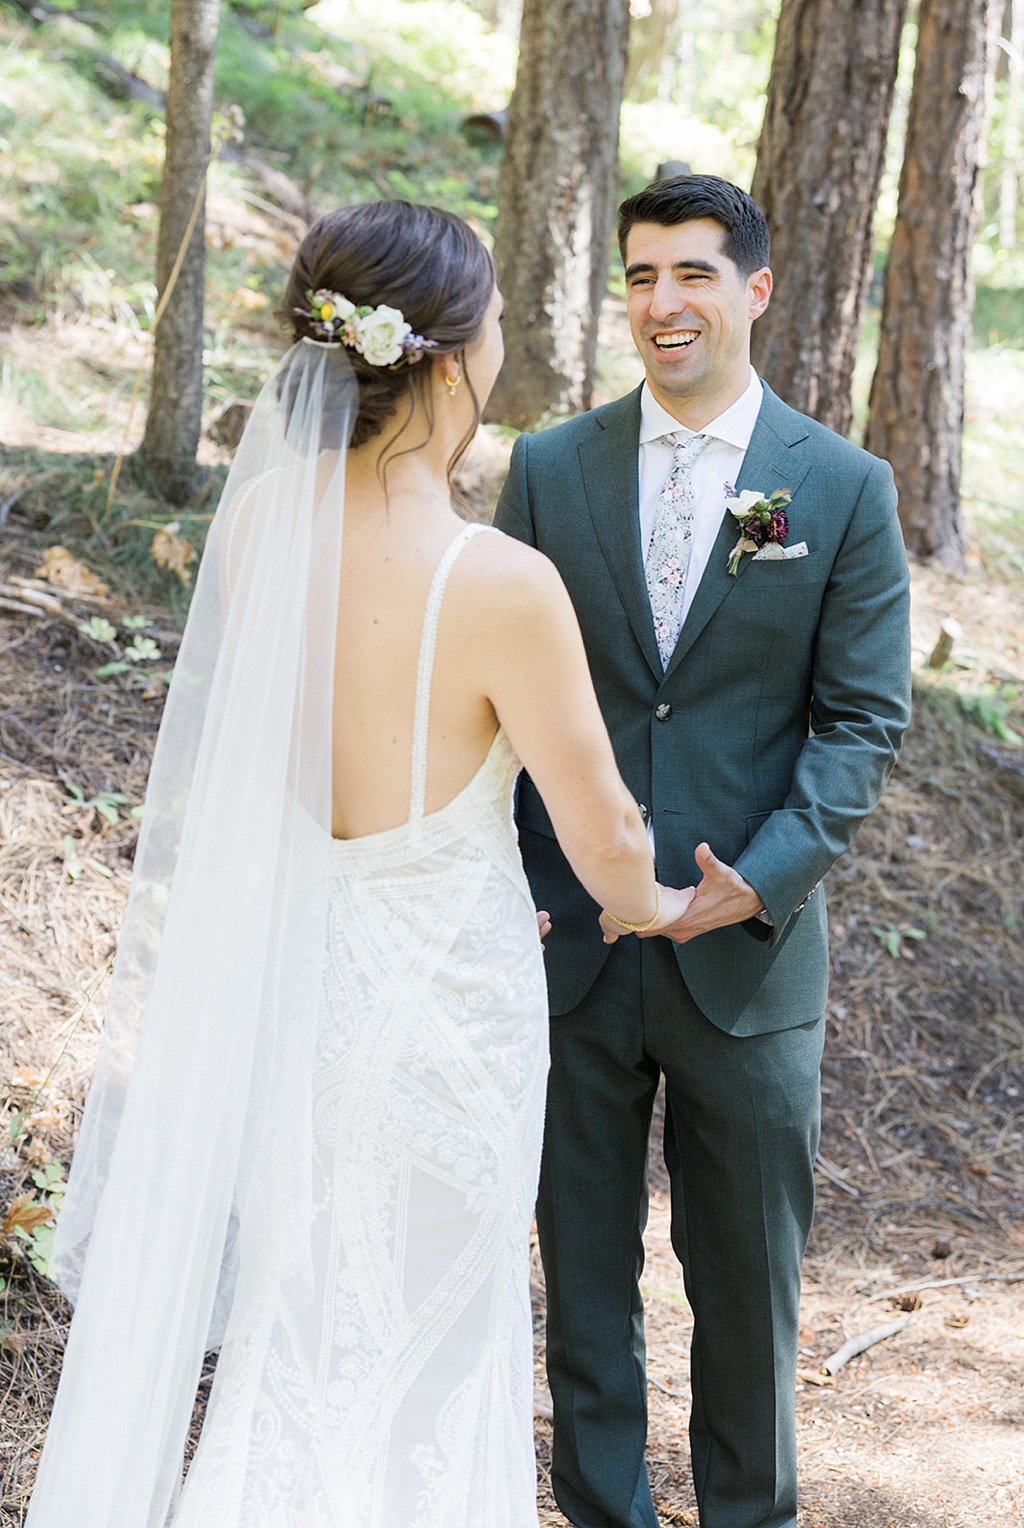 The bride and groom enjoy a first look at this Tierra Retreat Center wedding